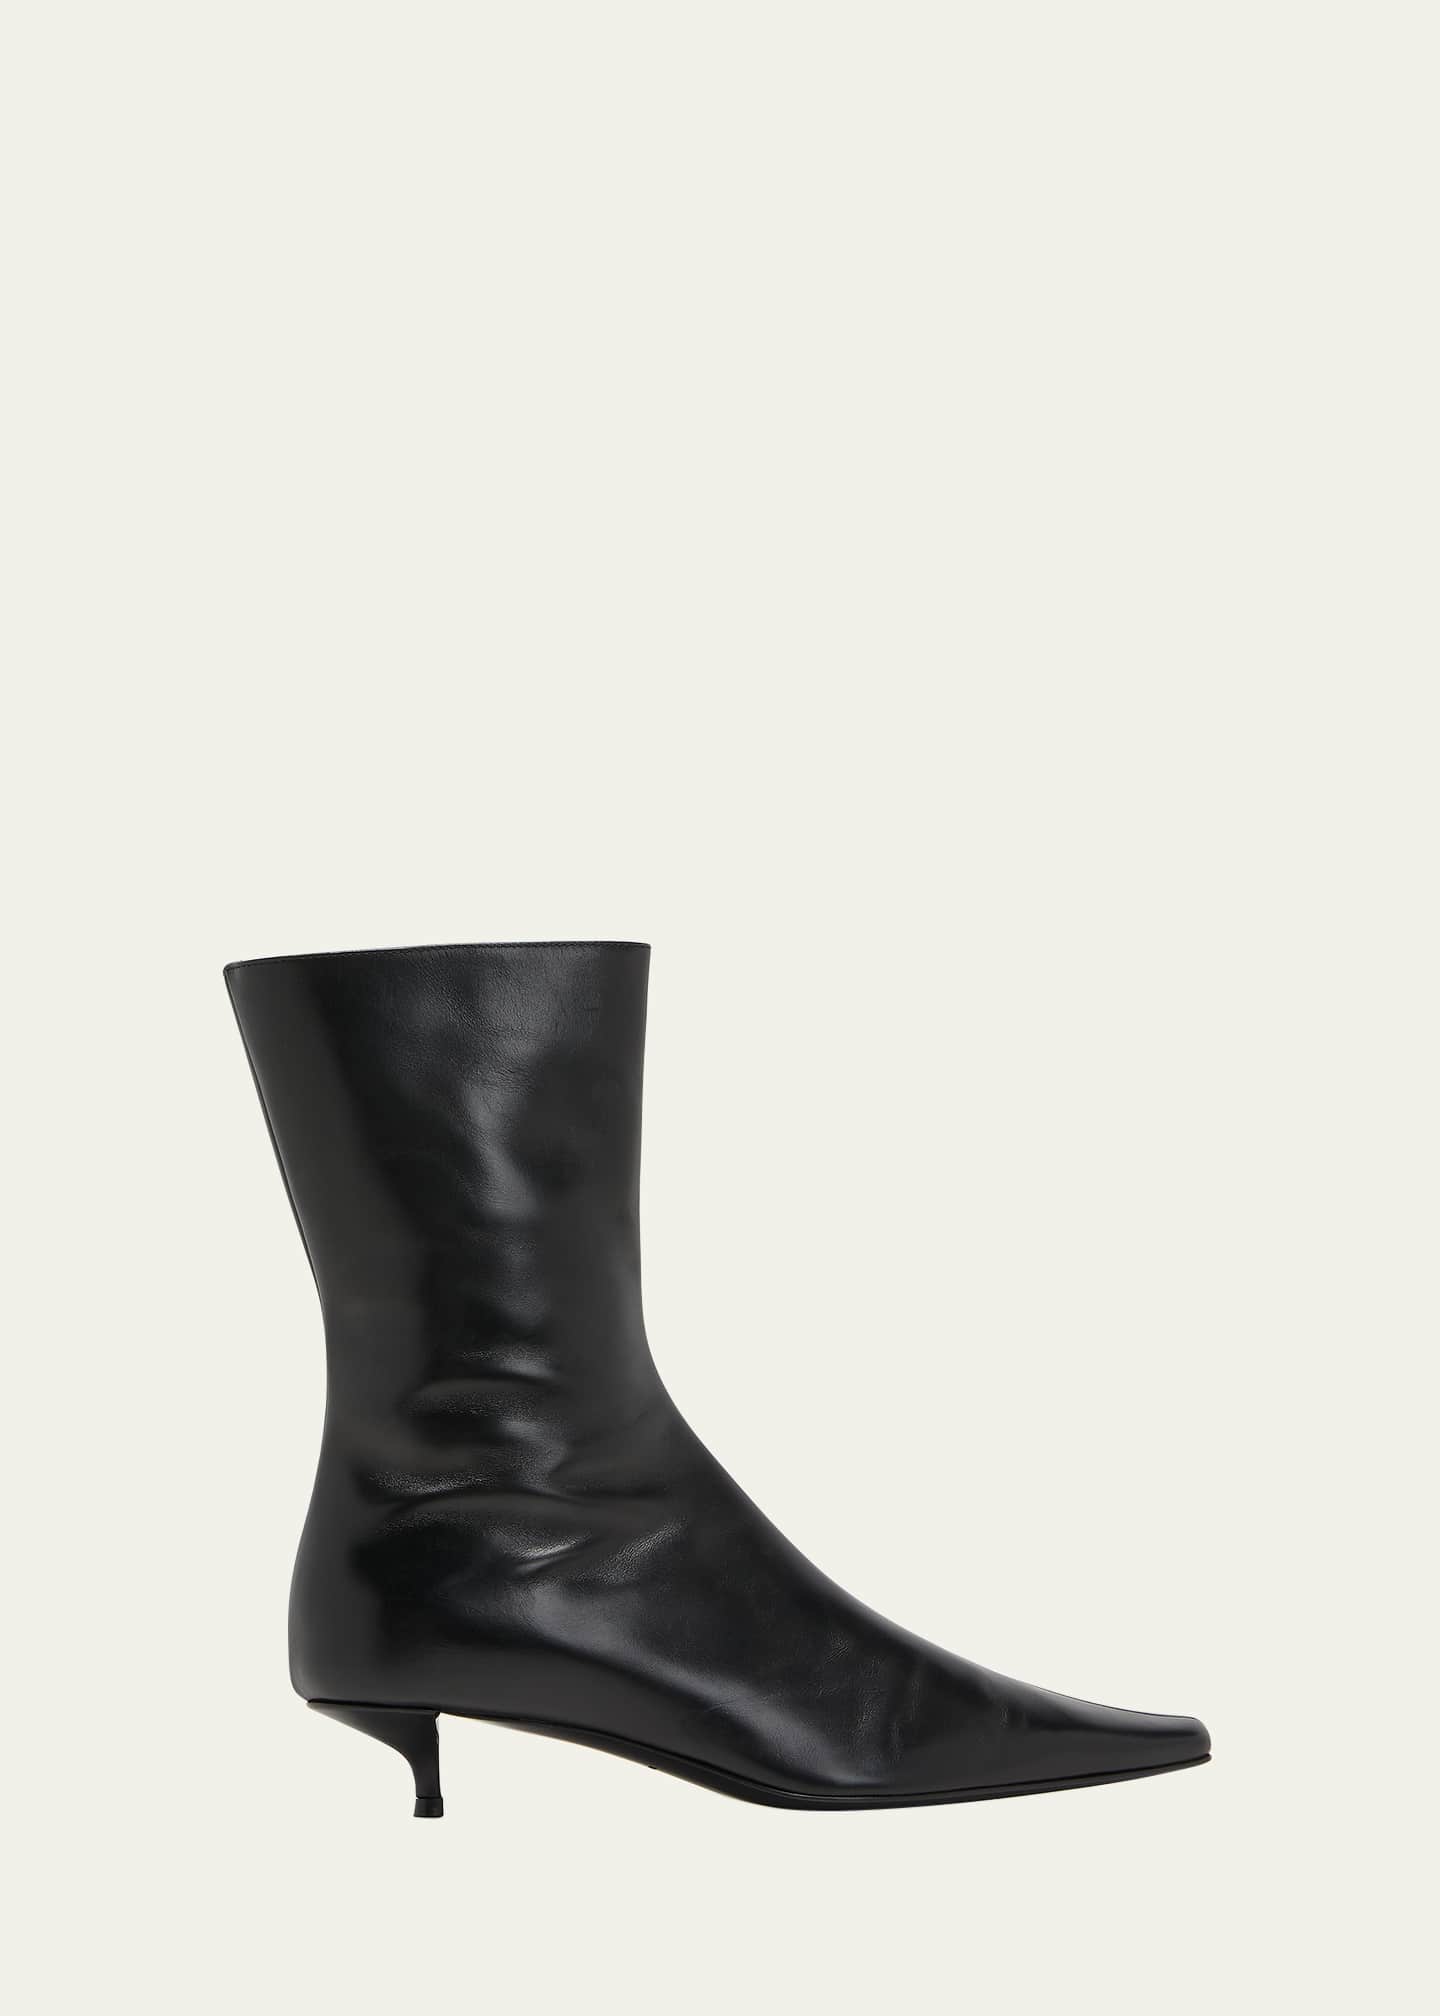 herlipto Cambon Ankle Boots ハーリップトゥ 3404円引き - n3quimica